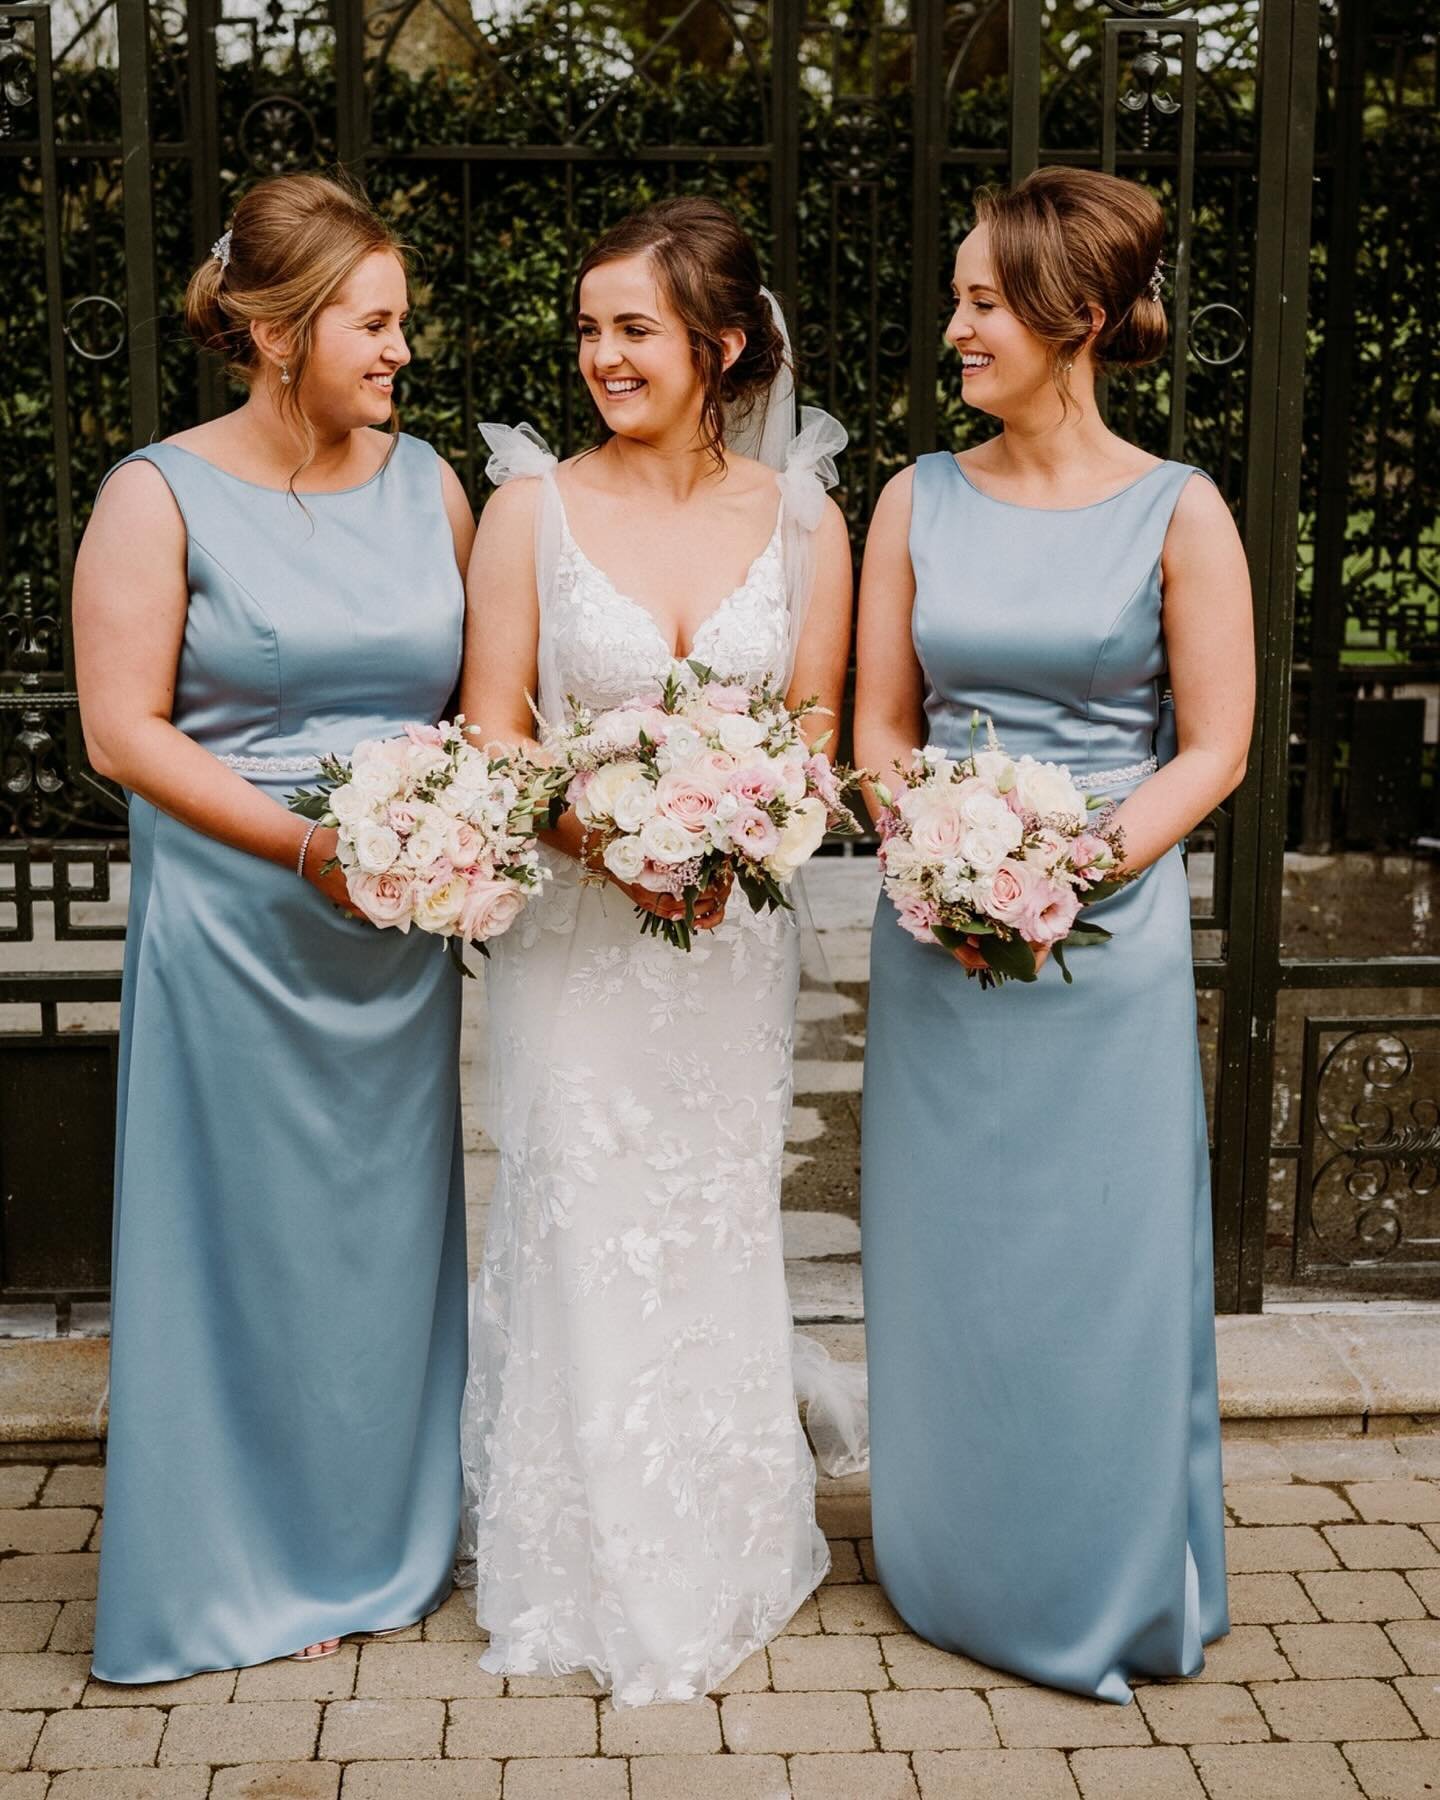 The biggest honour a photographer can have is to be asked back by the same family to document another wedding.
Not one, not two but three beautiful sisters.

The same family home and the same church.
I feel truly blessed.
Thank you from the bottom of